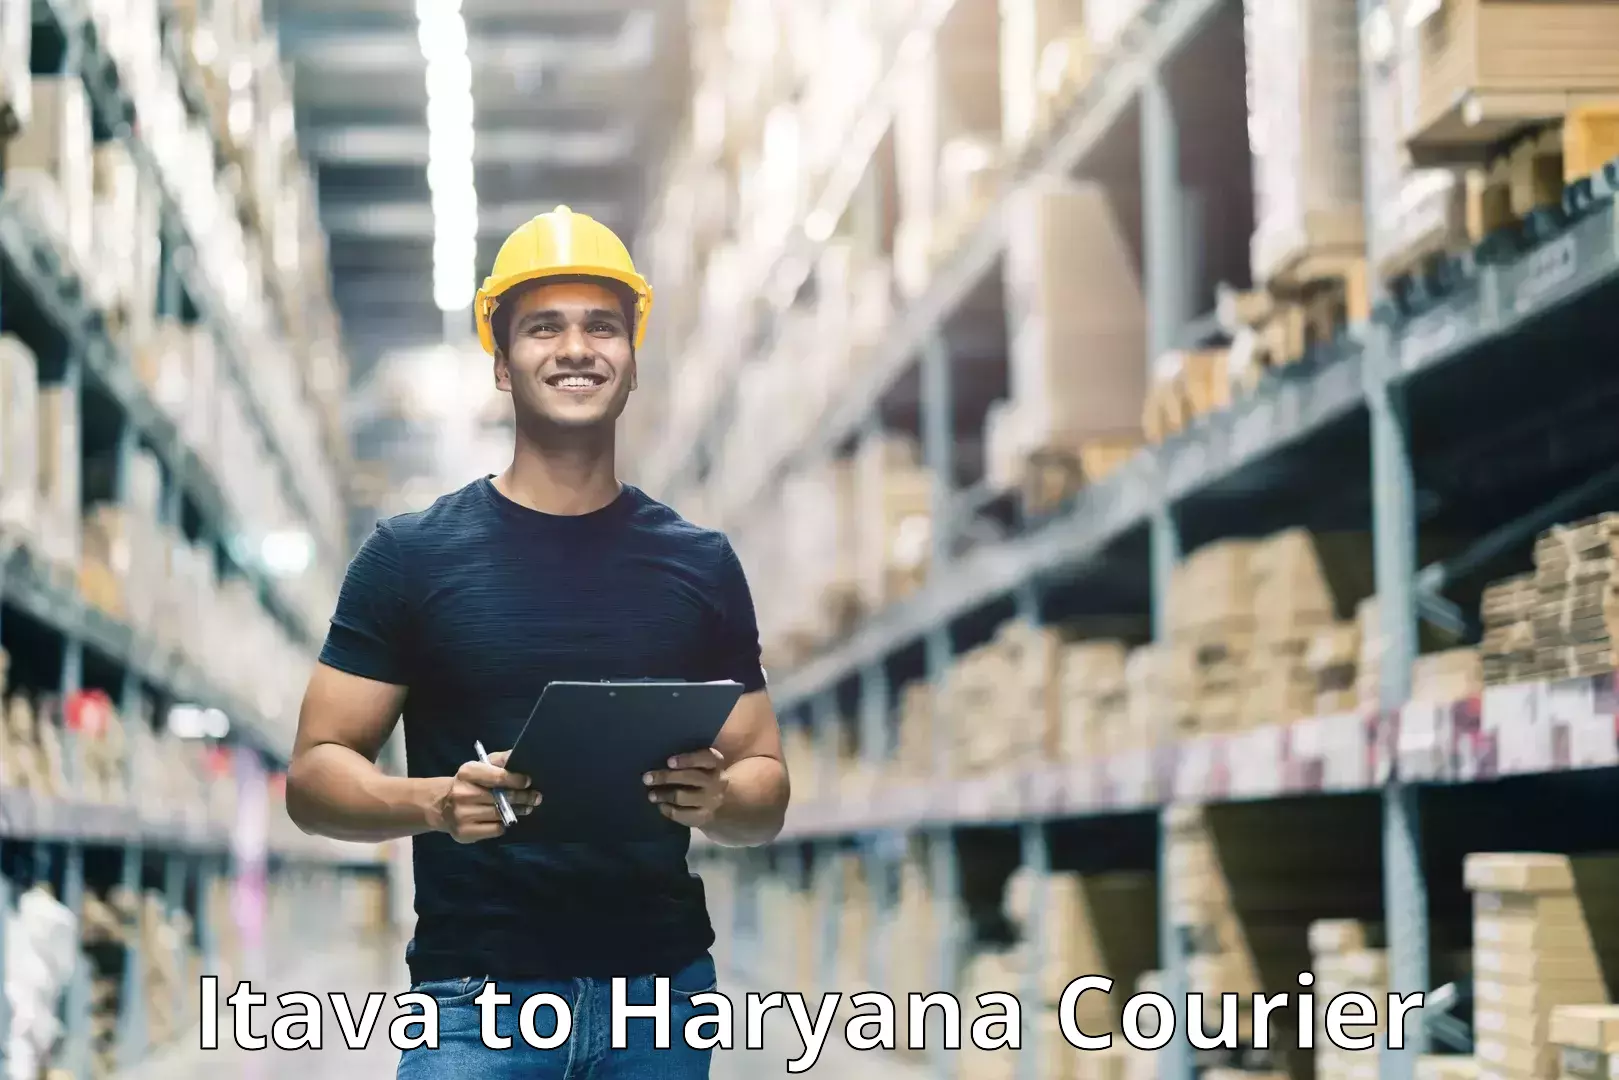 Efficient shipping operations Itava to NCR Haryana